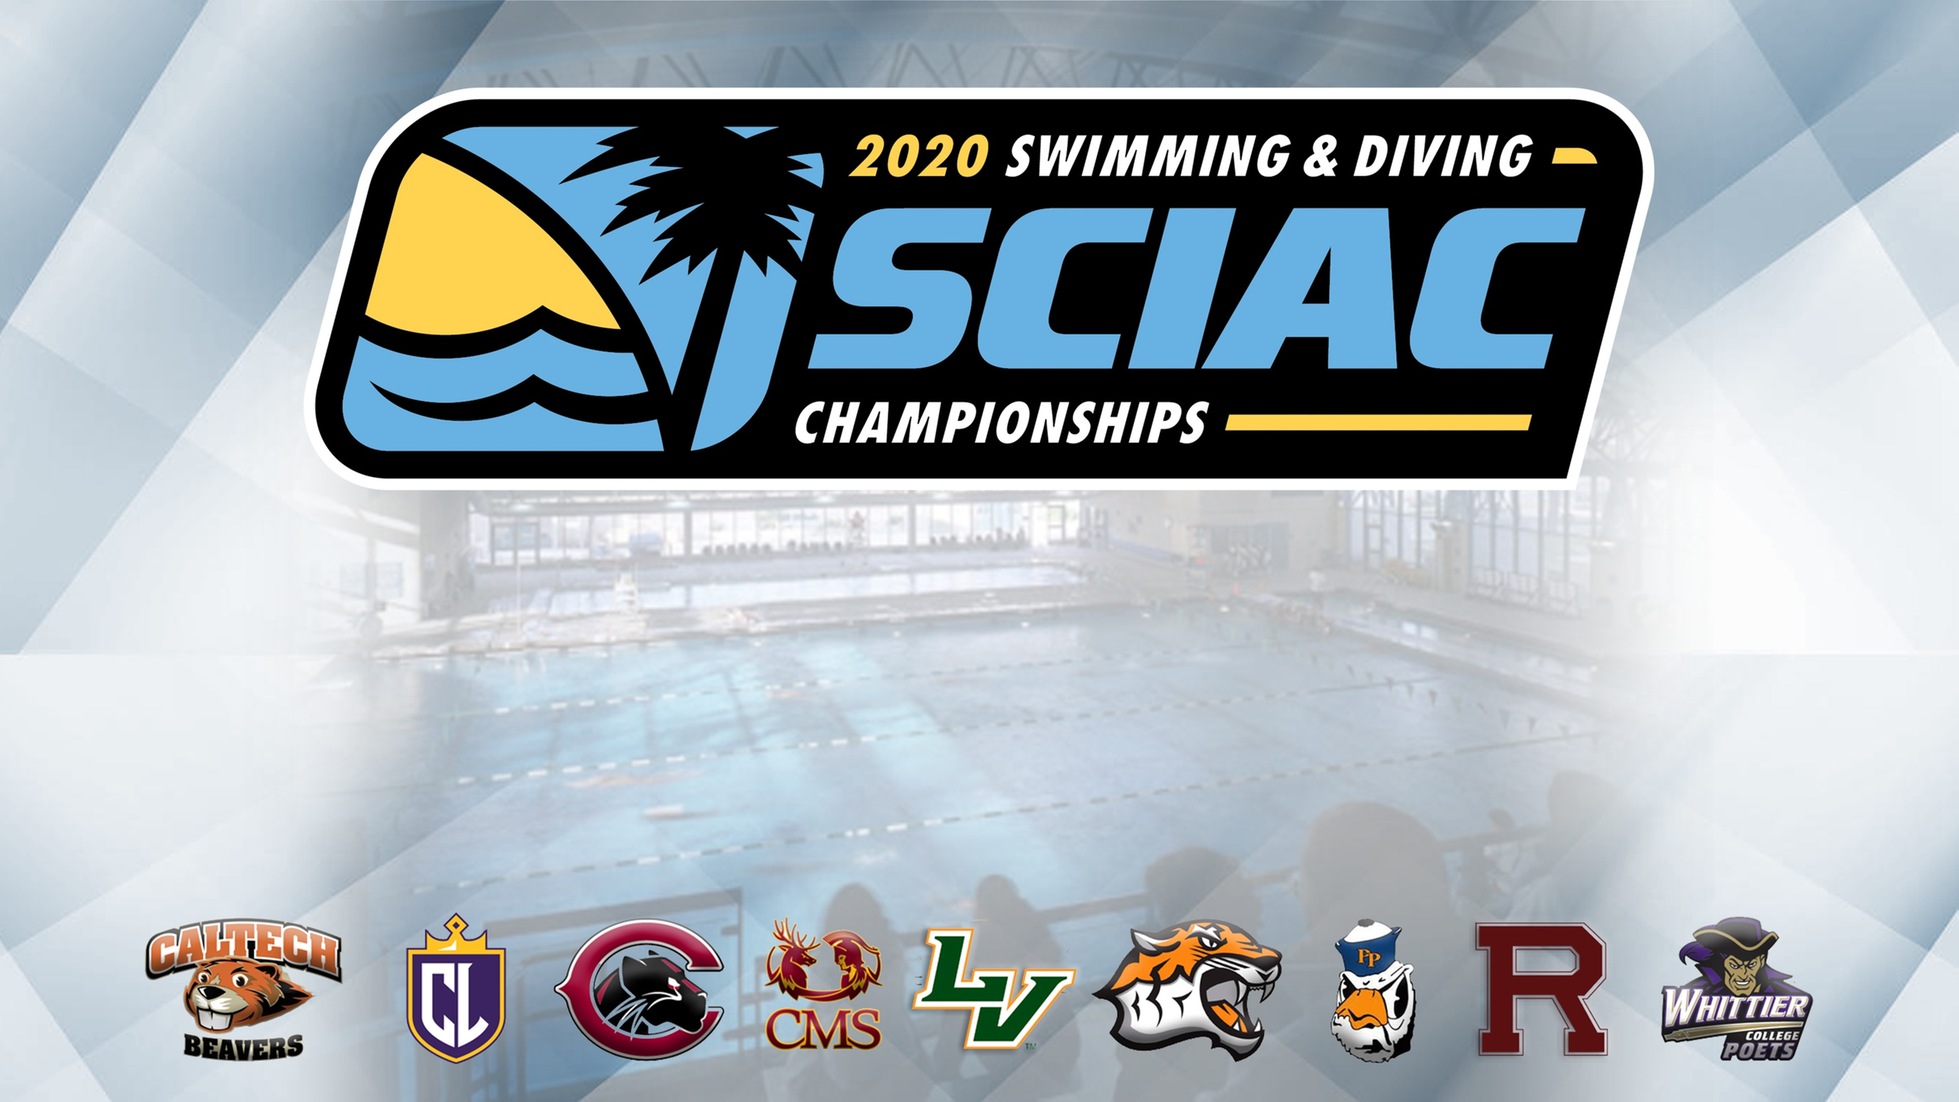 Cal Lutheran hosting SCIAC 2020 Swimming & Diving Championships